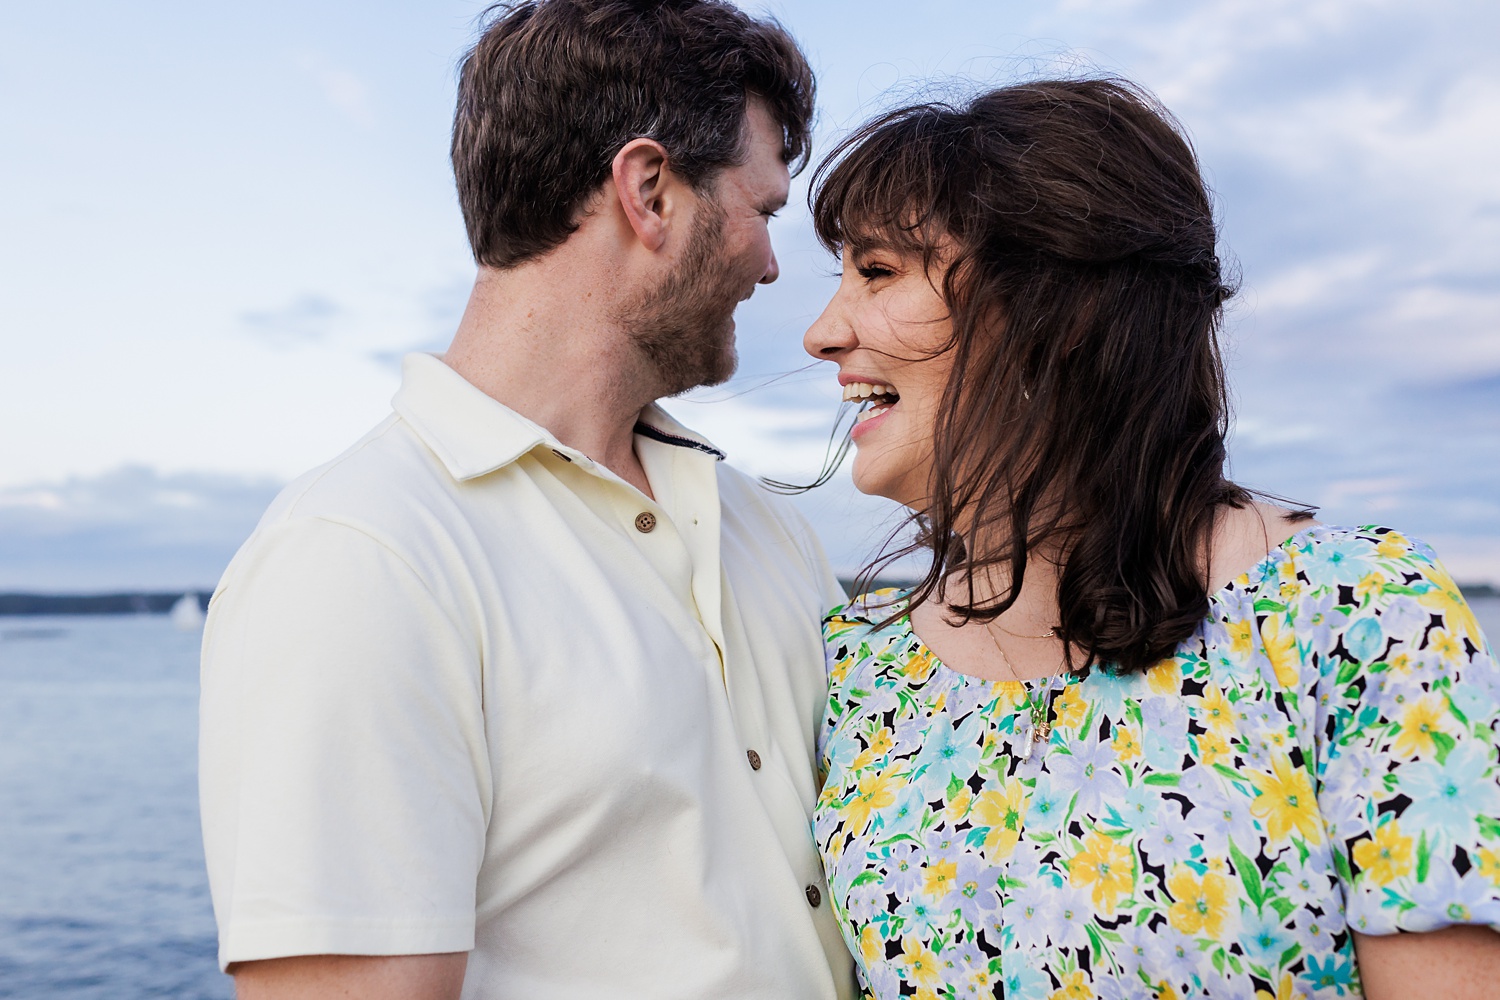 Laughter at the NH engagement session